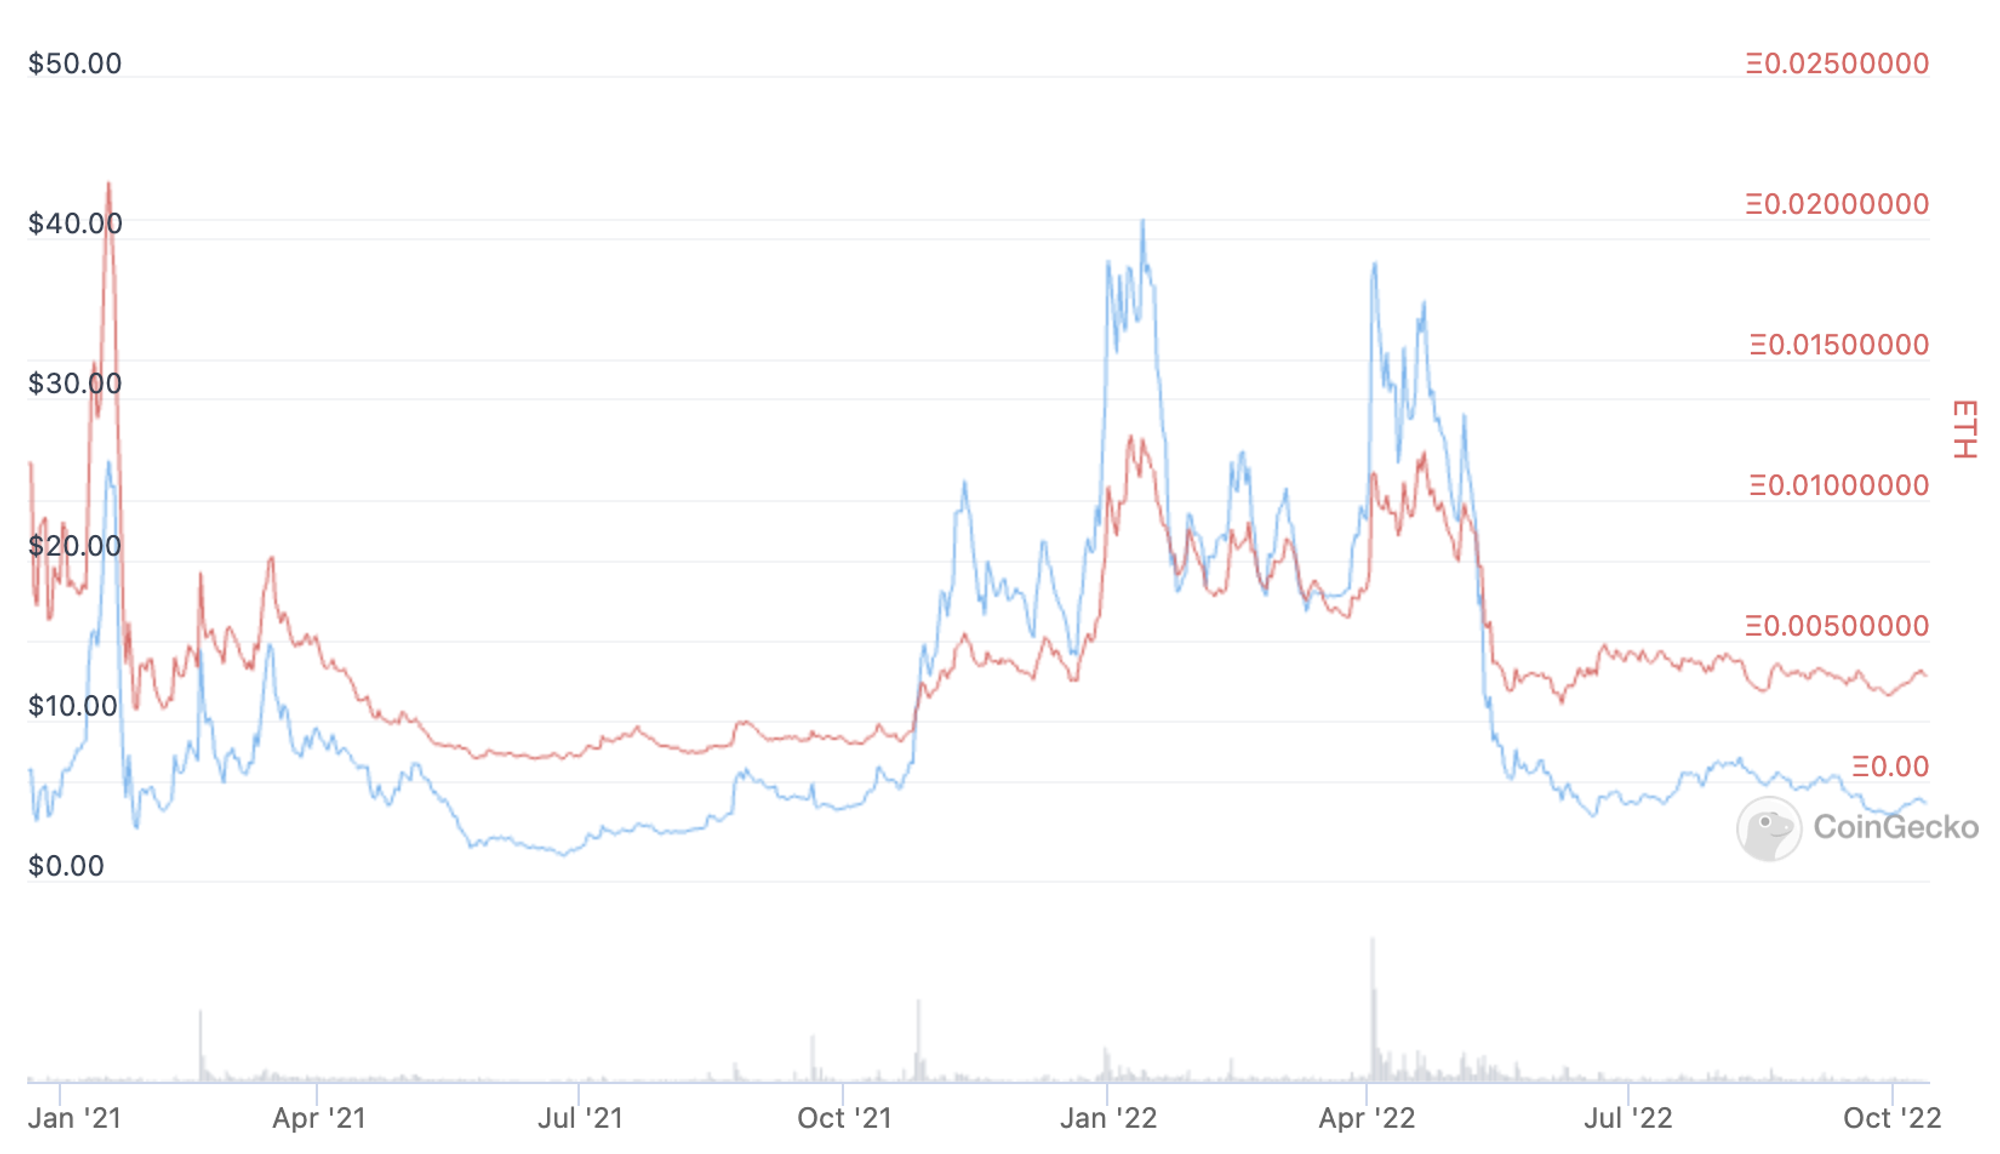 The price of FXS and ETH. Most of DeFi is highly correlated with ETH, and FXS is no exception. But there is less correlation here for FXS than there is with CVX.